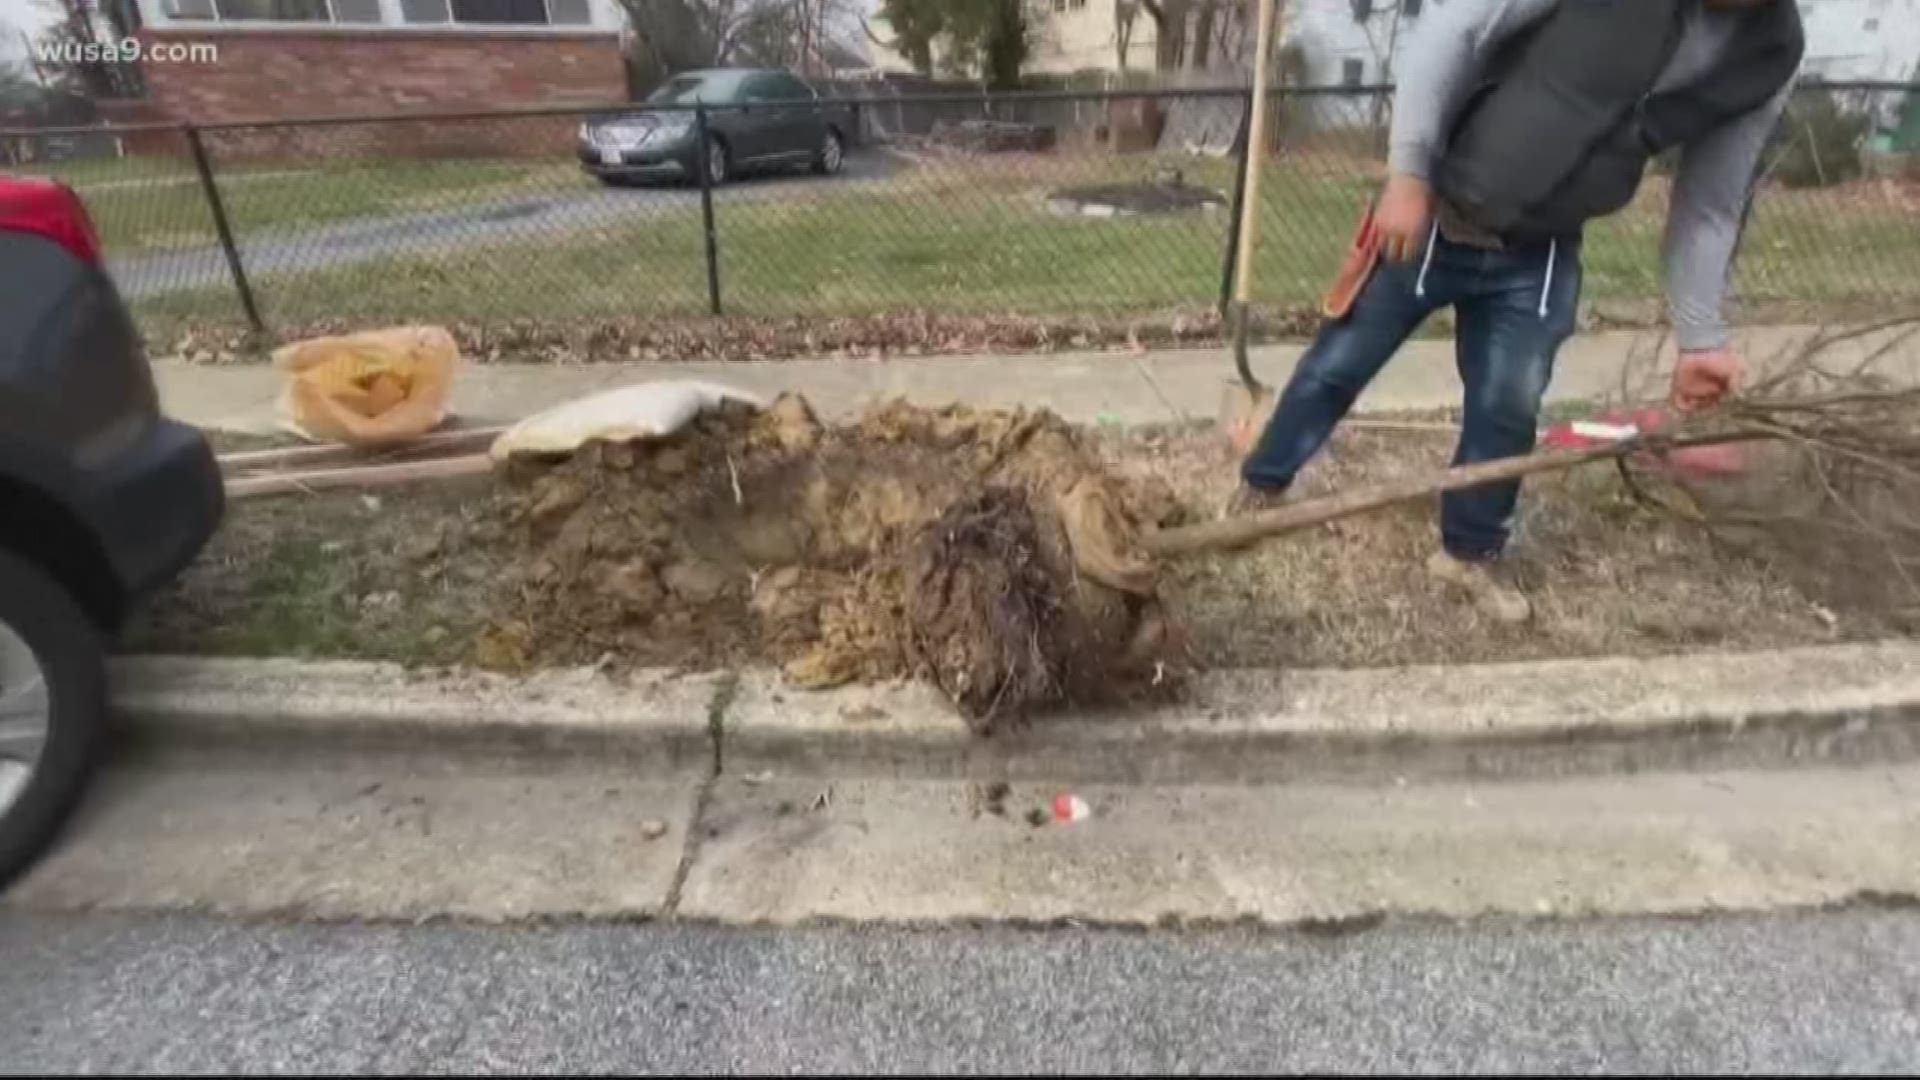 The planting of new trees across PG Co. neighborhoods has caused residents' complaints. Maintenance and broken sewer lines are just a few of their worries.